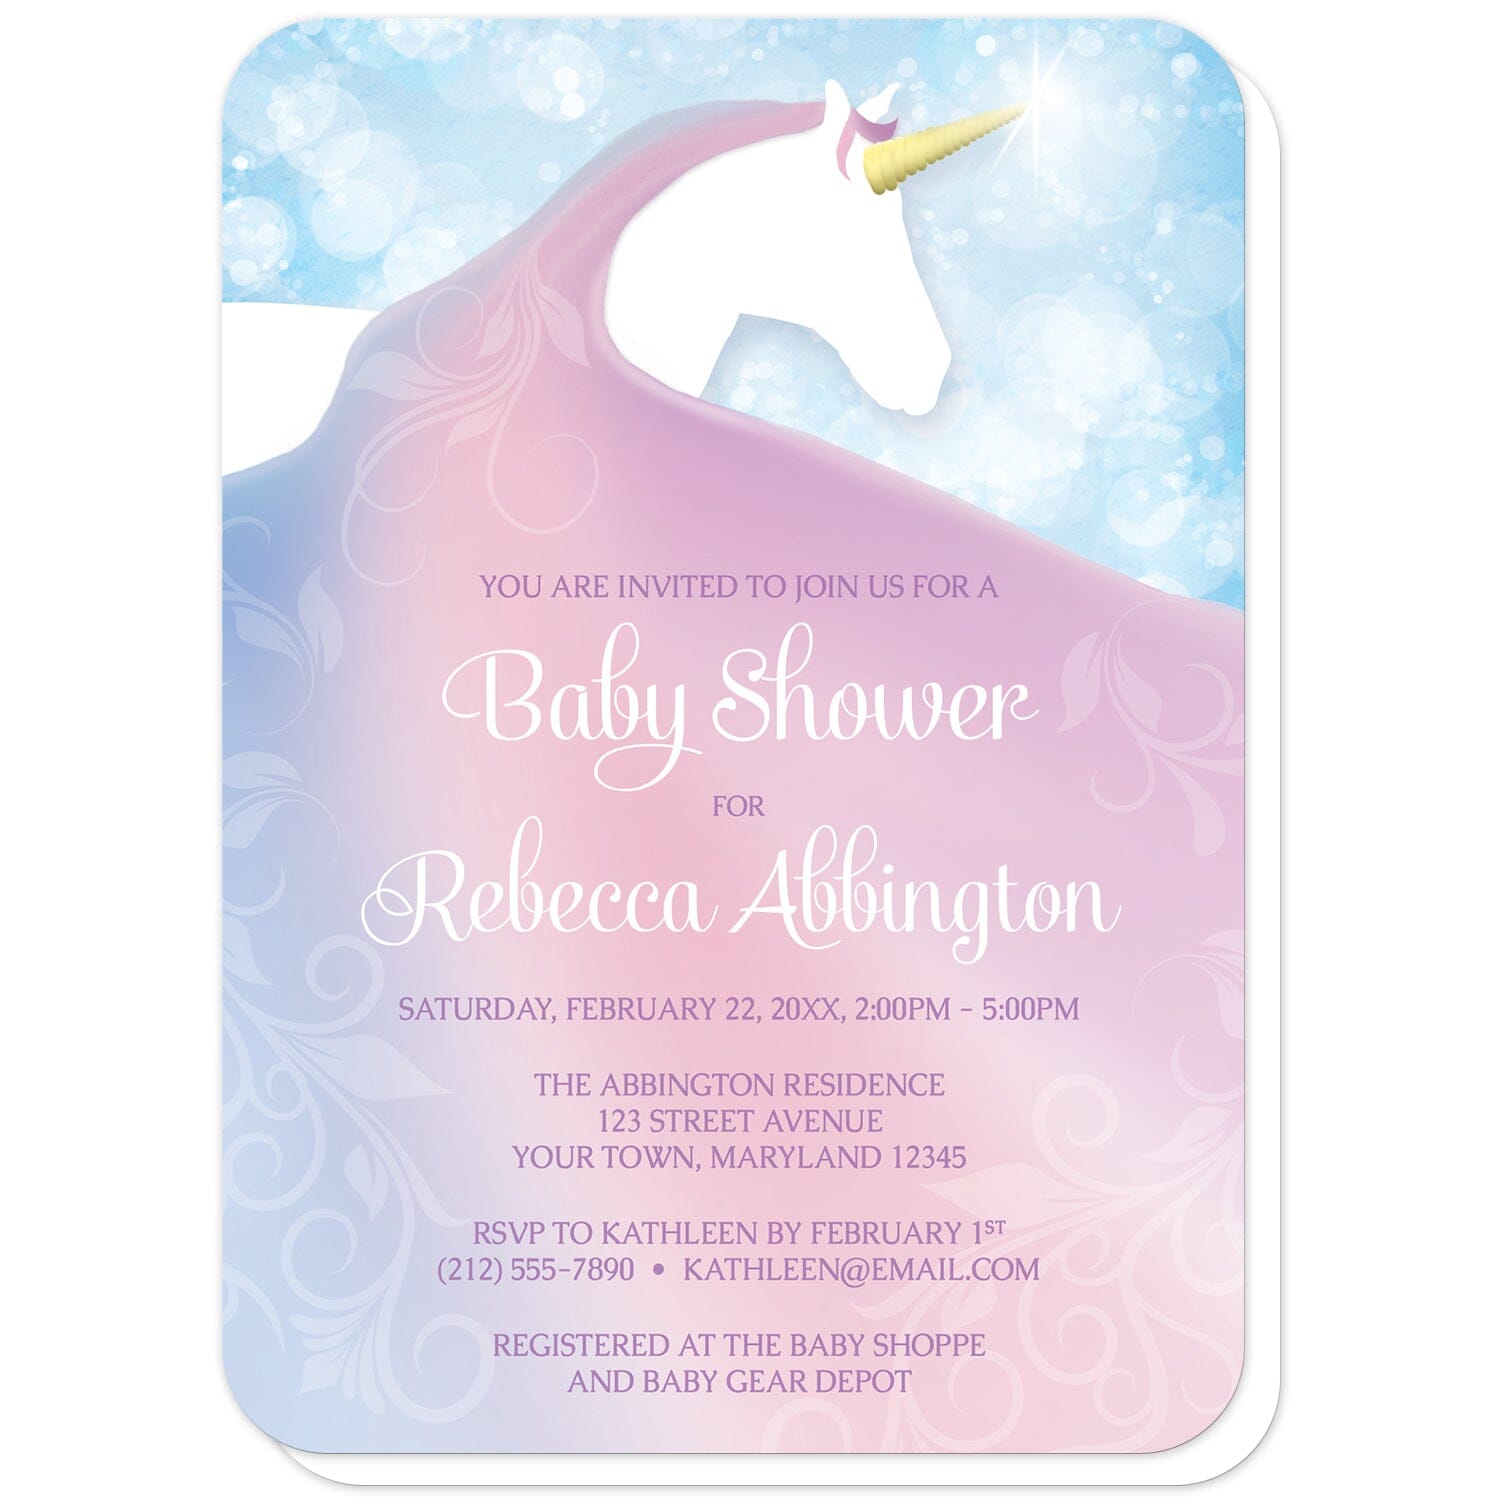 Magical Fairy-tale Unicorn Baby Shower Invitations (with rounded corners) at Artistically Invited. Uniquely illustrated magical fairy-tale unicorn baby shower invitations with a white silhouette unicorn with a golden horn and a long flowing mane in a pink, blue, and purple gradient design. The personalized information you provide for your baby shower celebration details will be custom printed in white and light purple over the colorful unicorn mane. Behind the unicorn is a magical blue bokeh background.